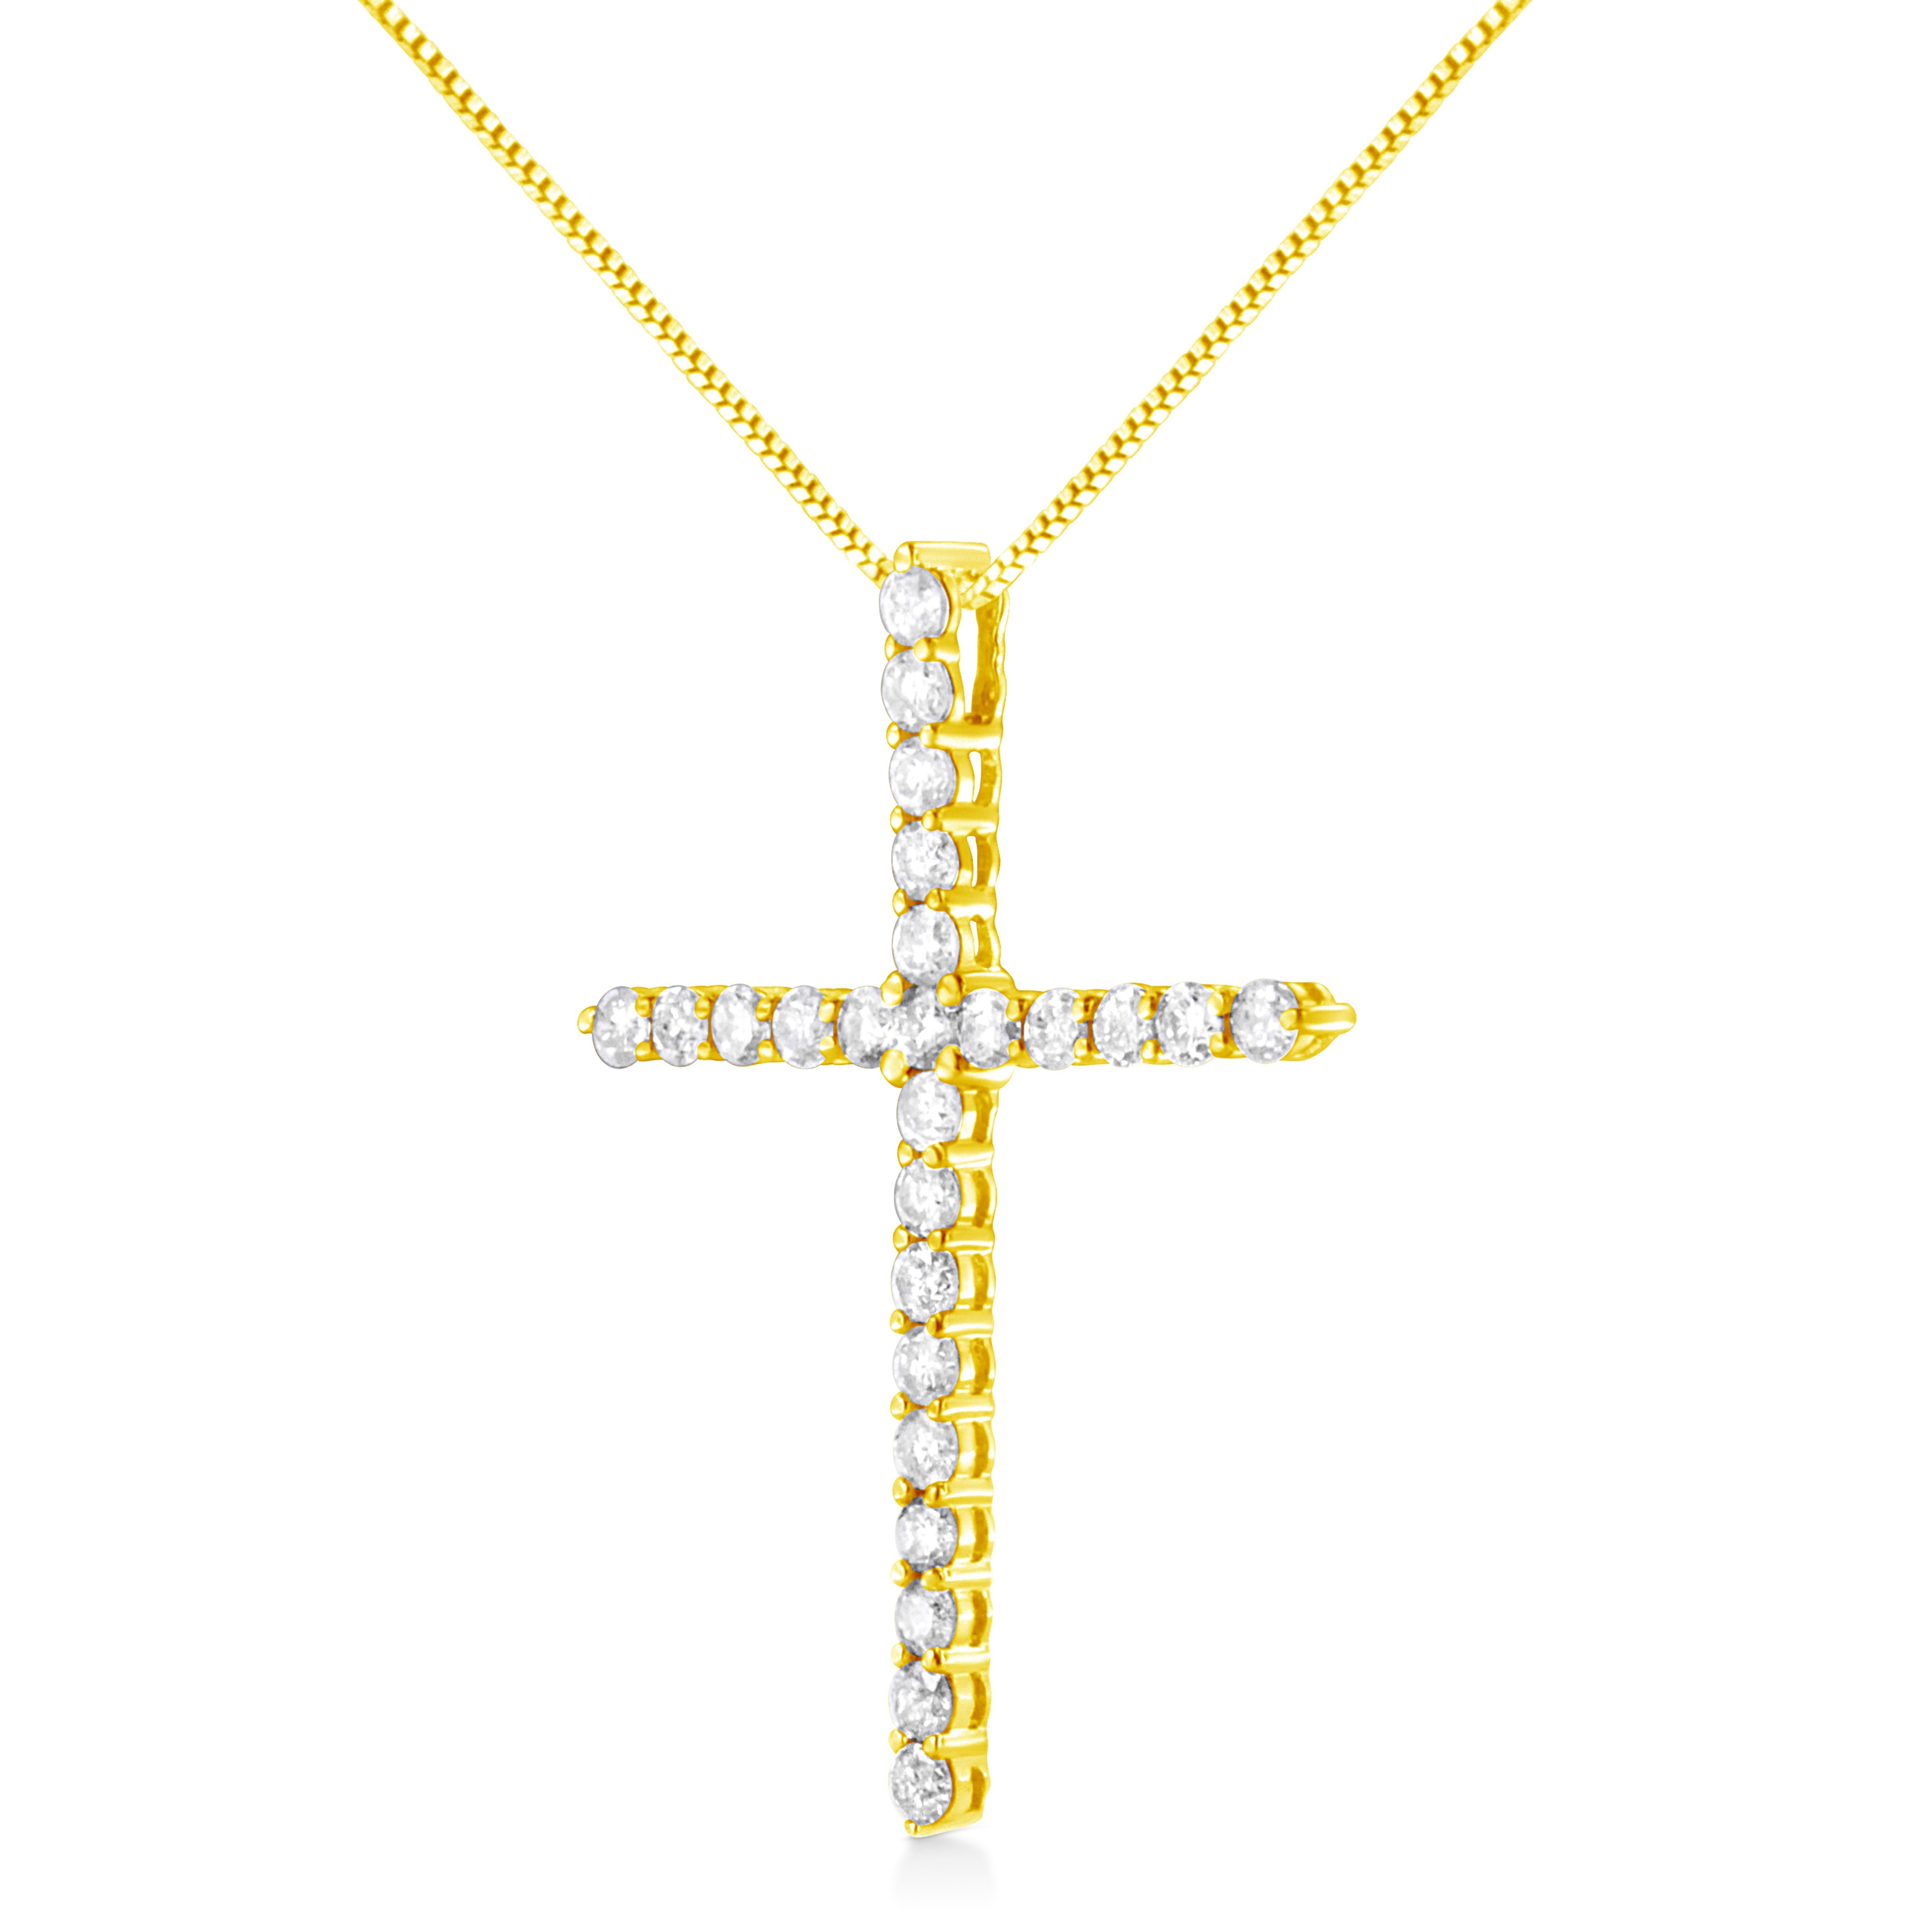 Modern 10K Yellow Gold 2.0 Cttw Round Diamond Cross Pendant Necklace with Box Chain For Sale